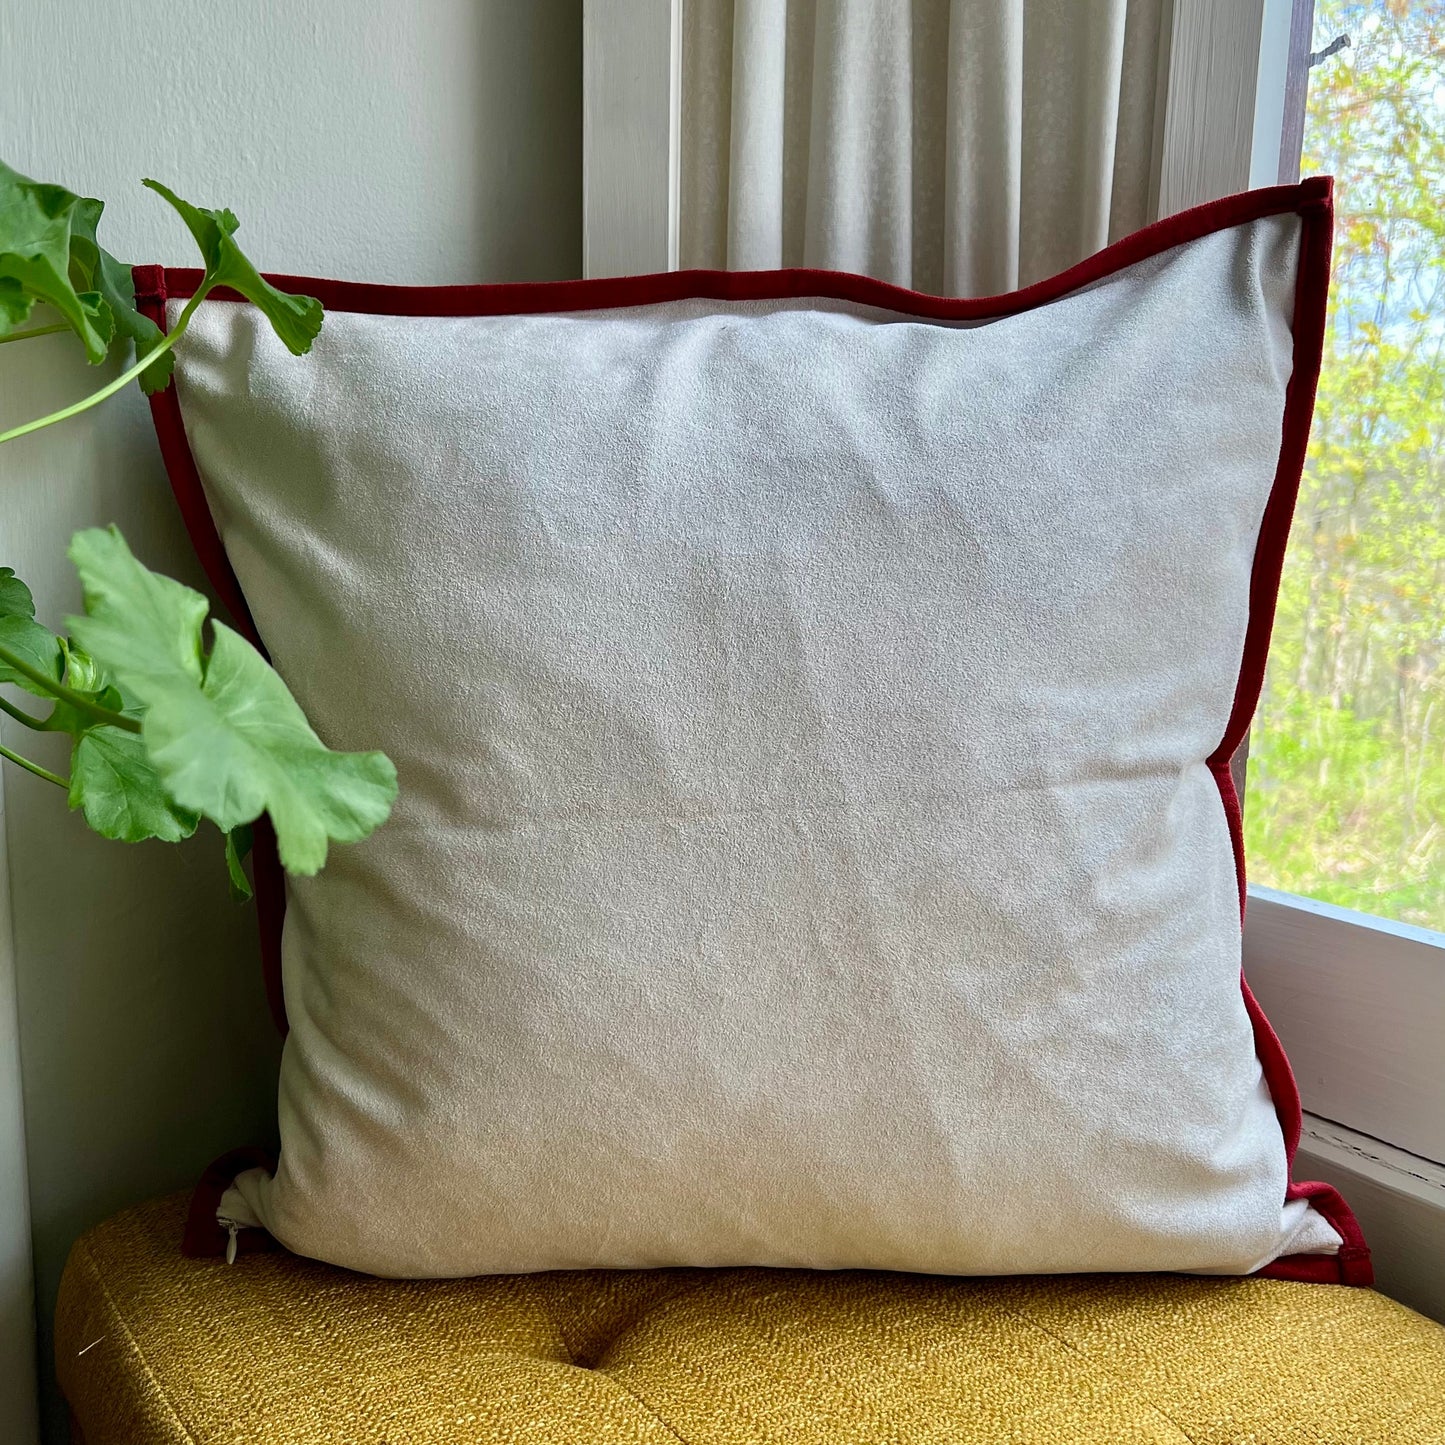 Red and White Floral Embroidered Pillow Cover